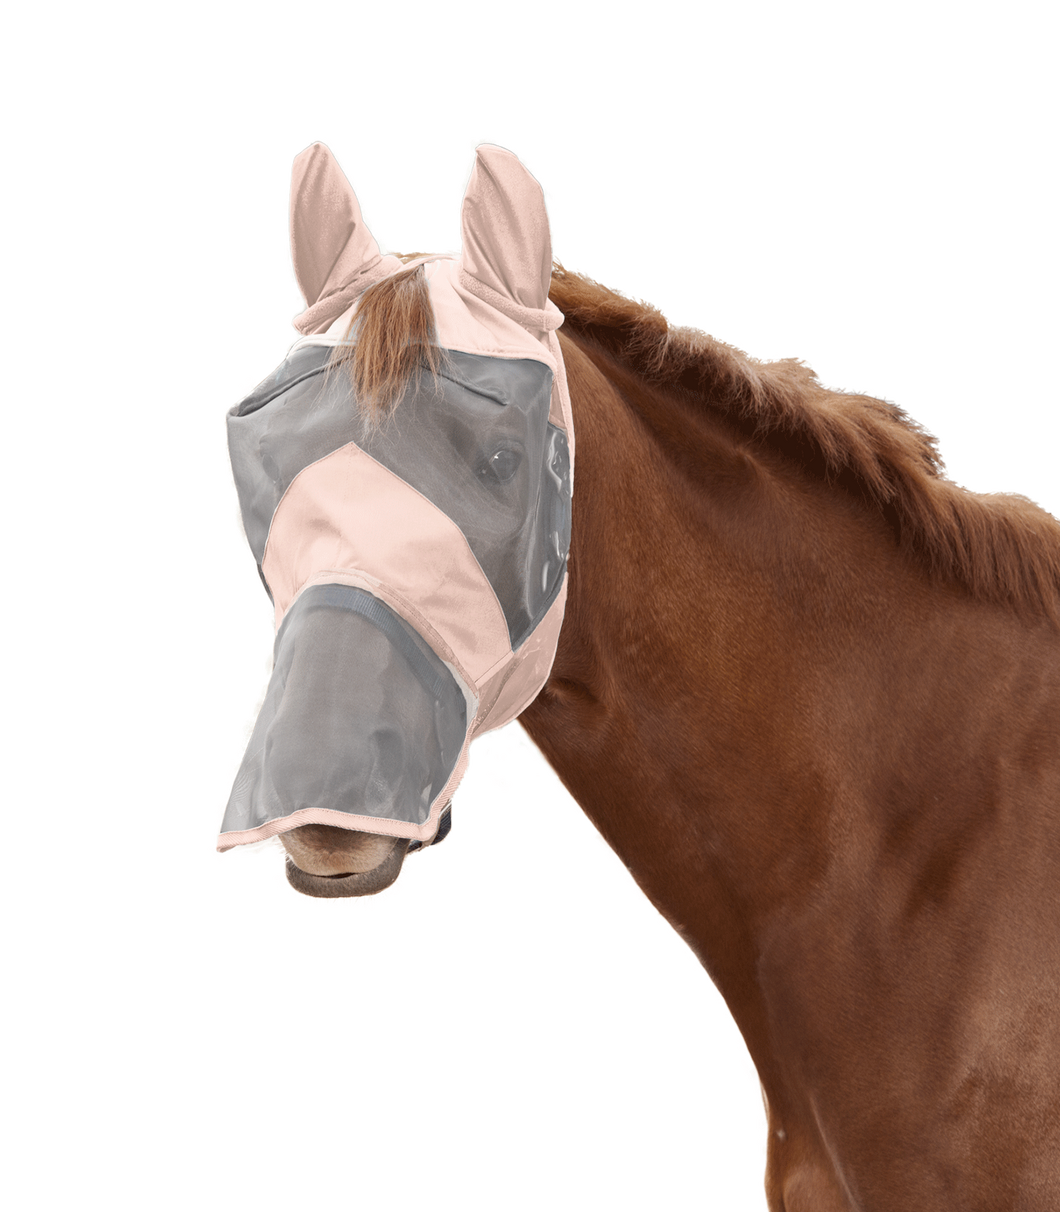 W rose pink fly mask with nose